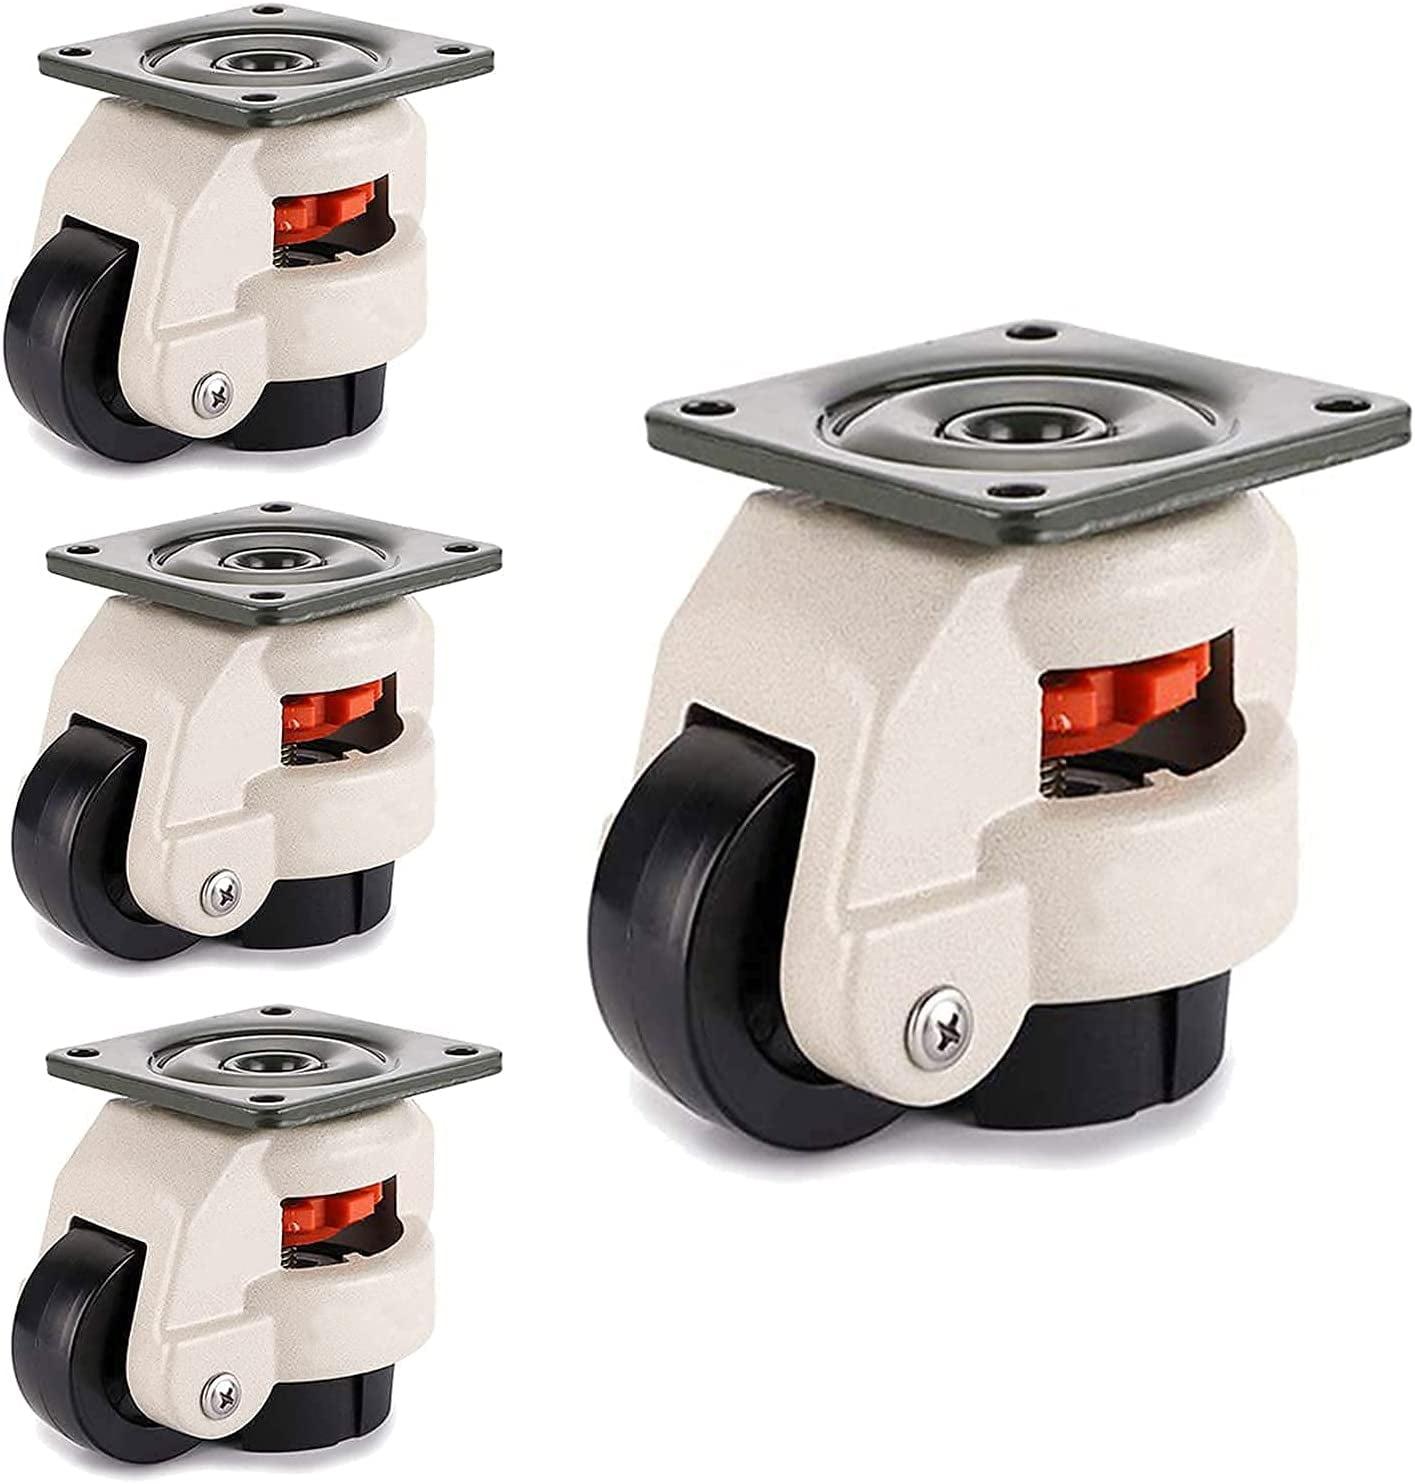 Workbench Casters,Heavy Duty Retractable Caster Designed,with Nylon Wheel and Rubber Foot,Retractable Workbench Caster,Loading Capacity 2200 Lbs,for Workbenches Machinery 